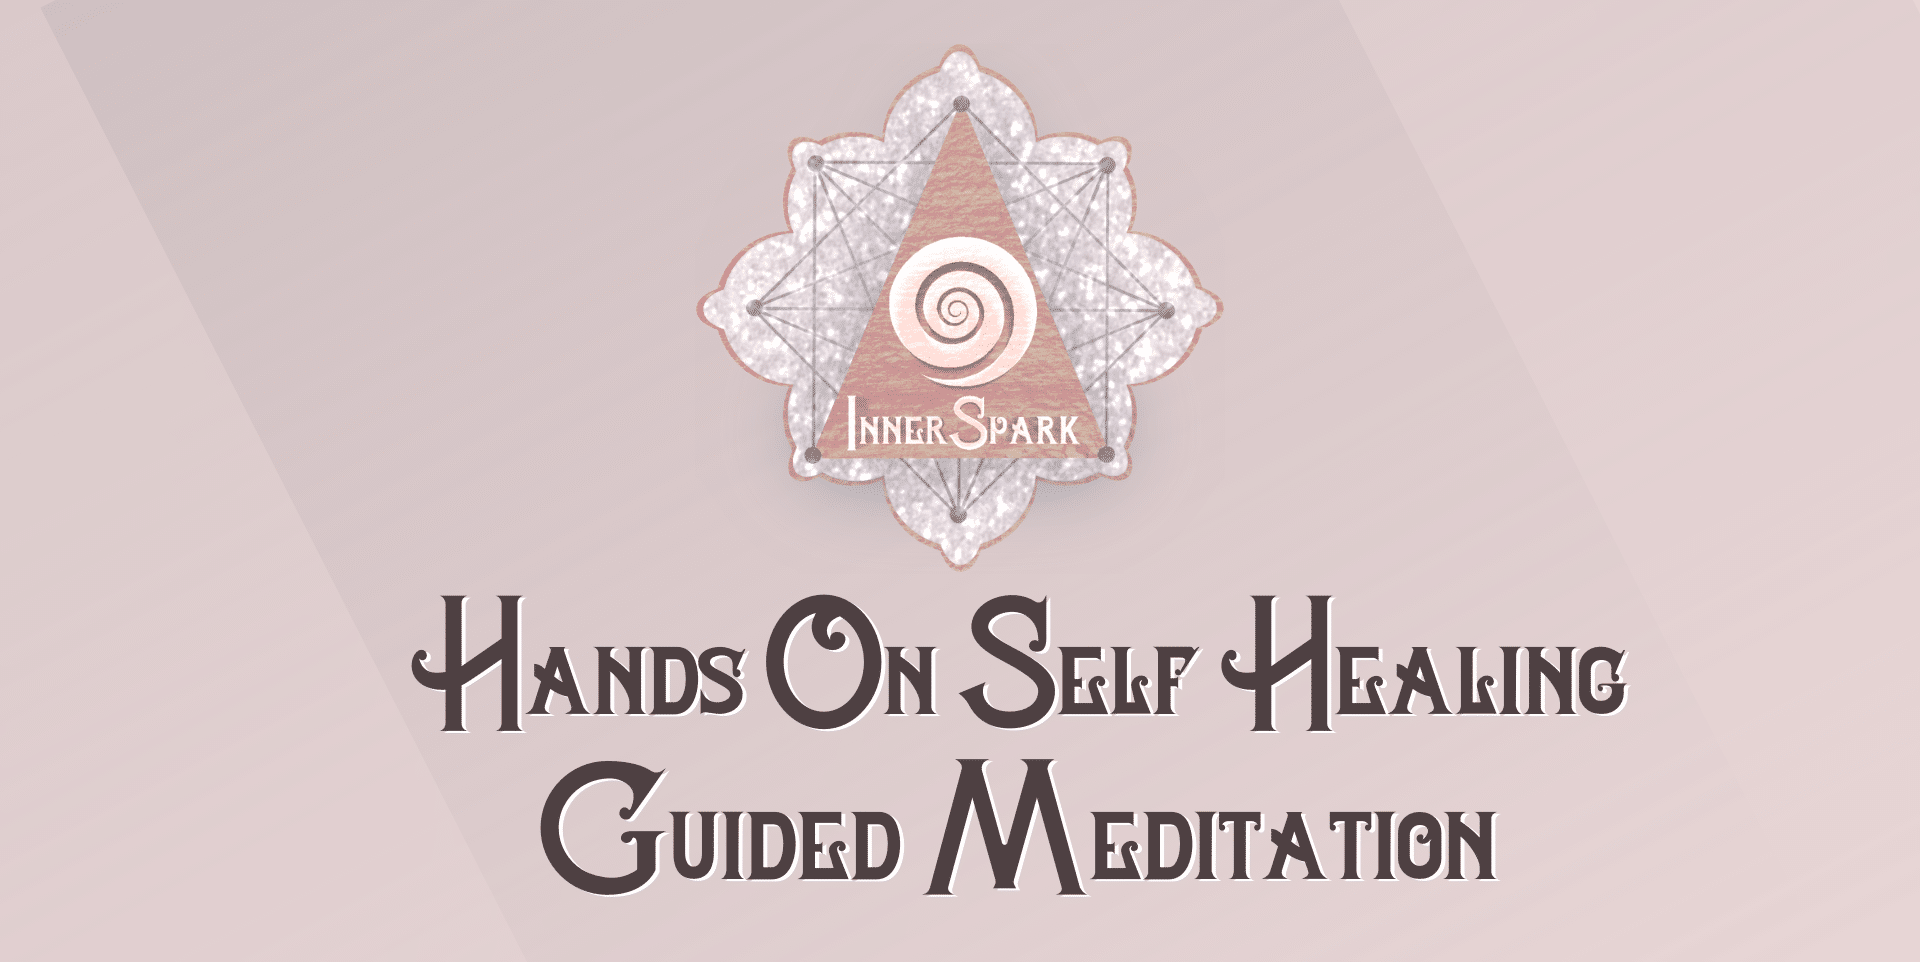 Hands On Self Healing Guided Meditation